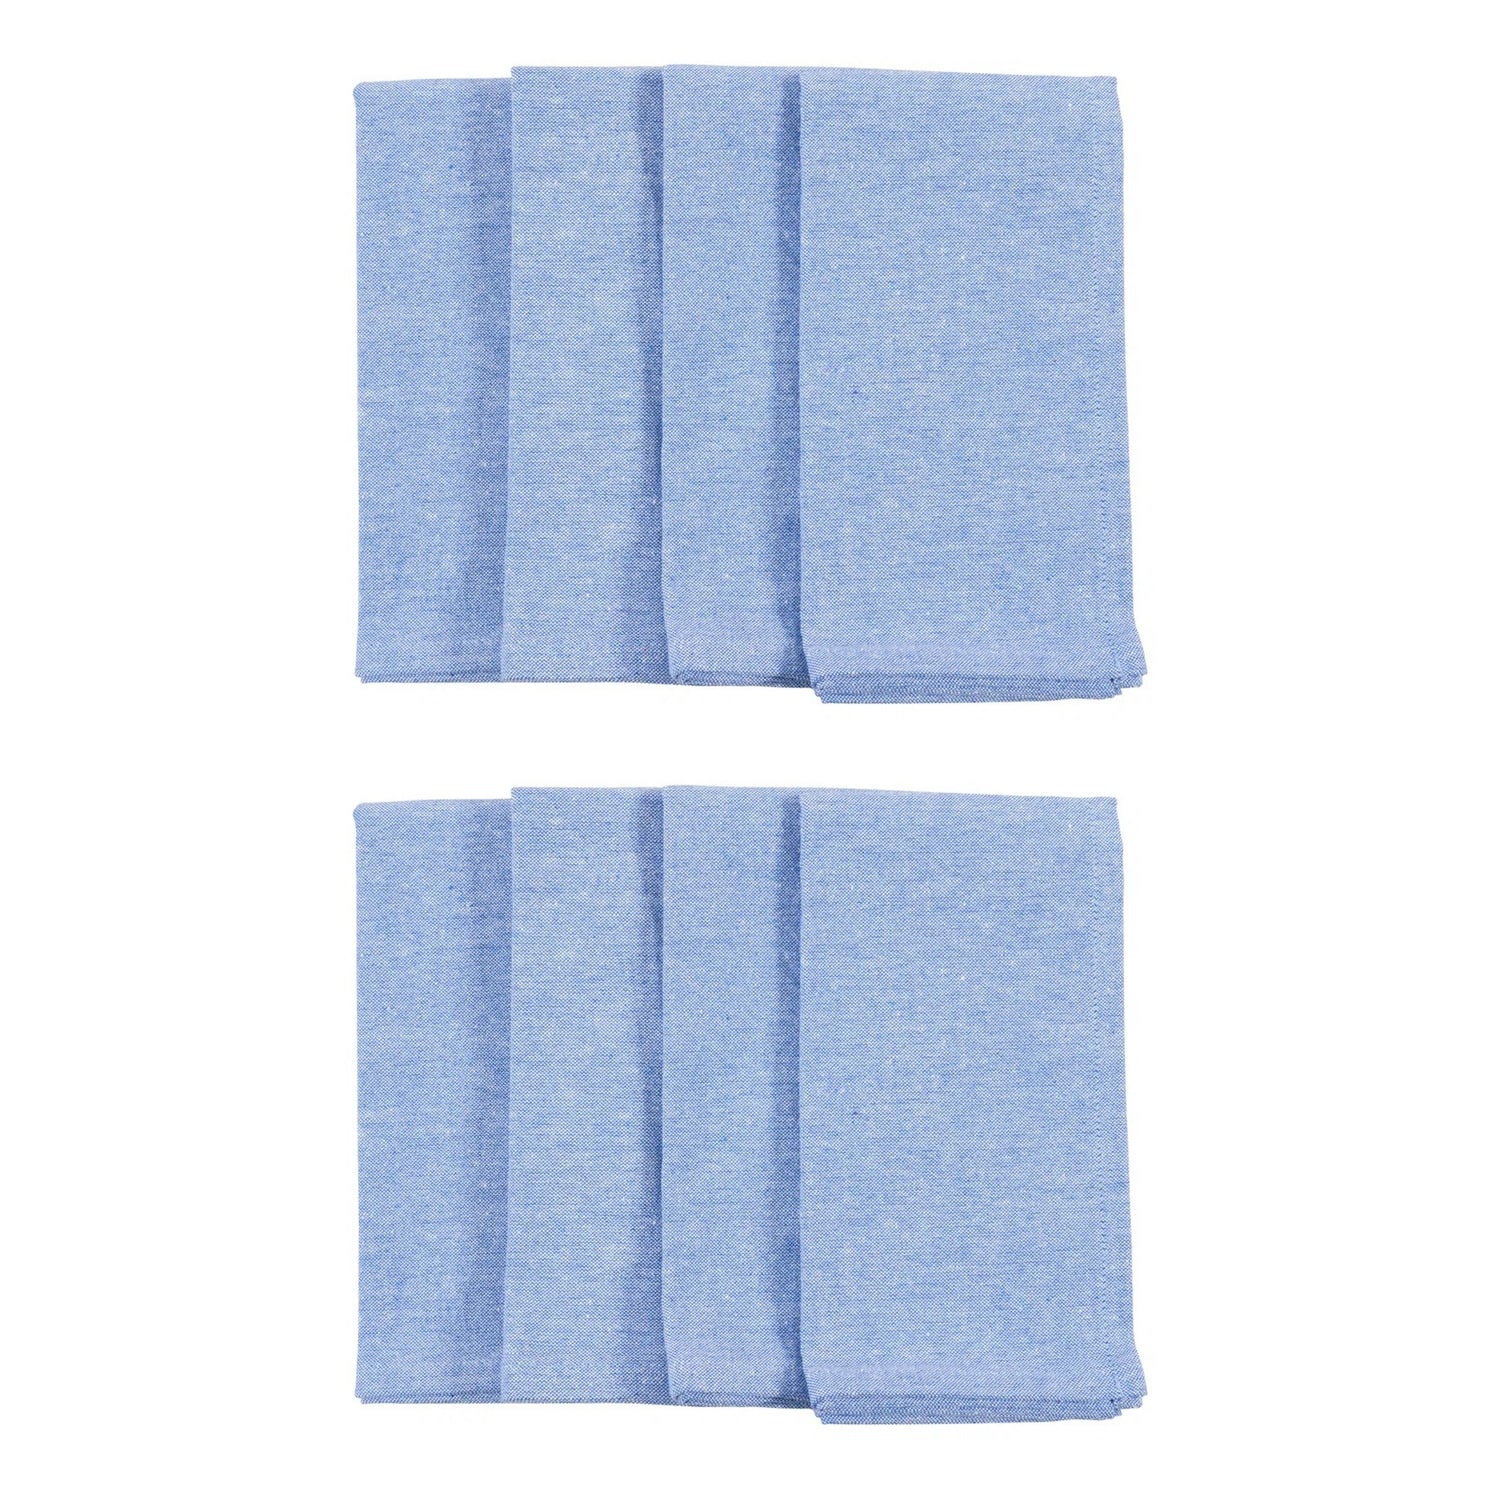 https://ak1.ostkcdn.com/images/products/is/images/direct/05ca5284f03e1deae3fbe9dad9375fcbdc646813/KAF-Home-Overbrook-Chambray-Dinner-Napkins%2C-Set-of-8.jpg